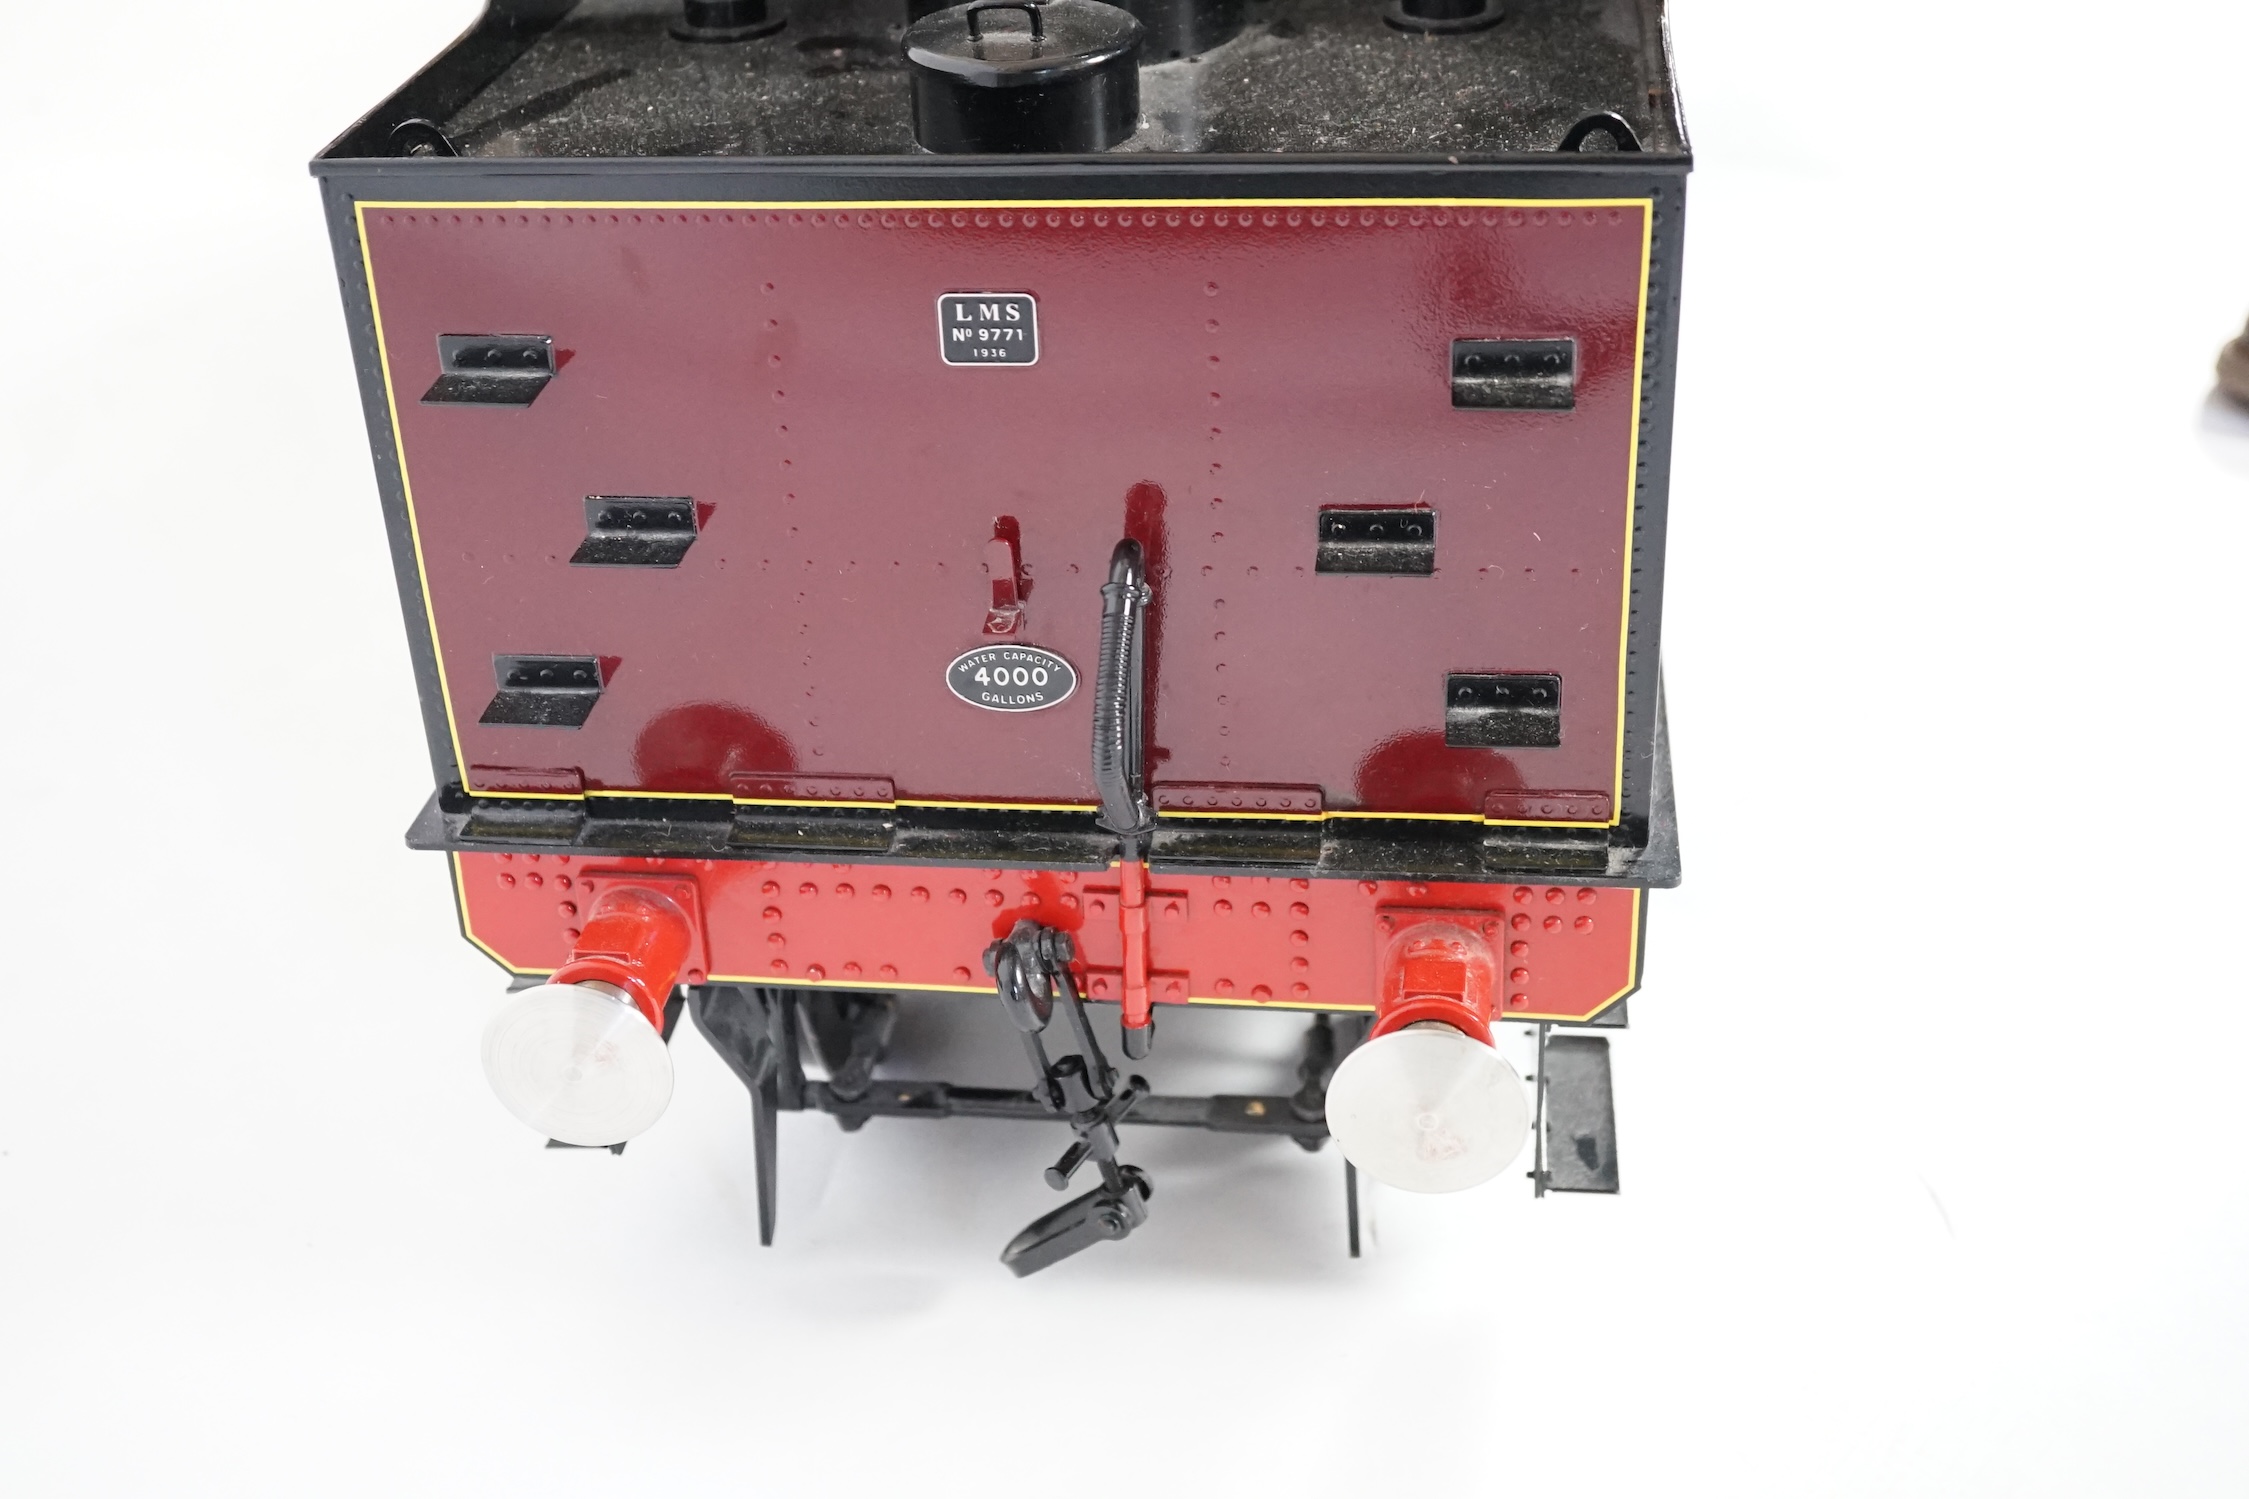 A Kingscale by Silver Crest Models 5 inch gauge coal fired live steam LMS Jubilee Class 4-6-0 locomotive, in lined maroon livery as Warspite 5724